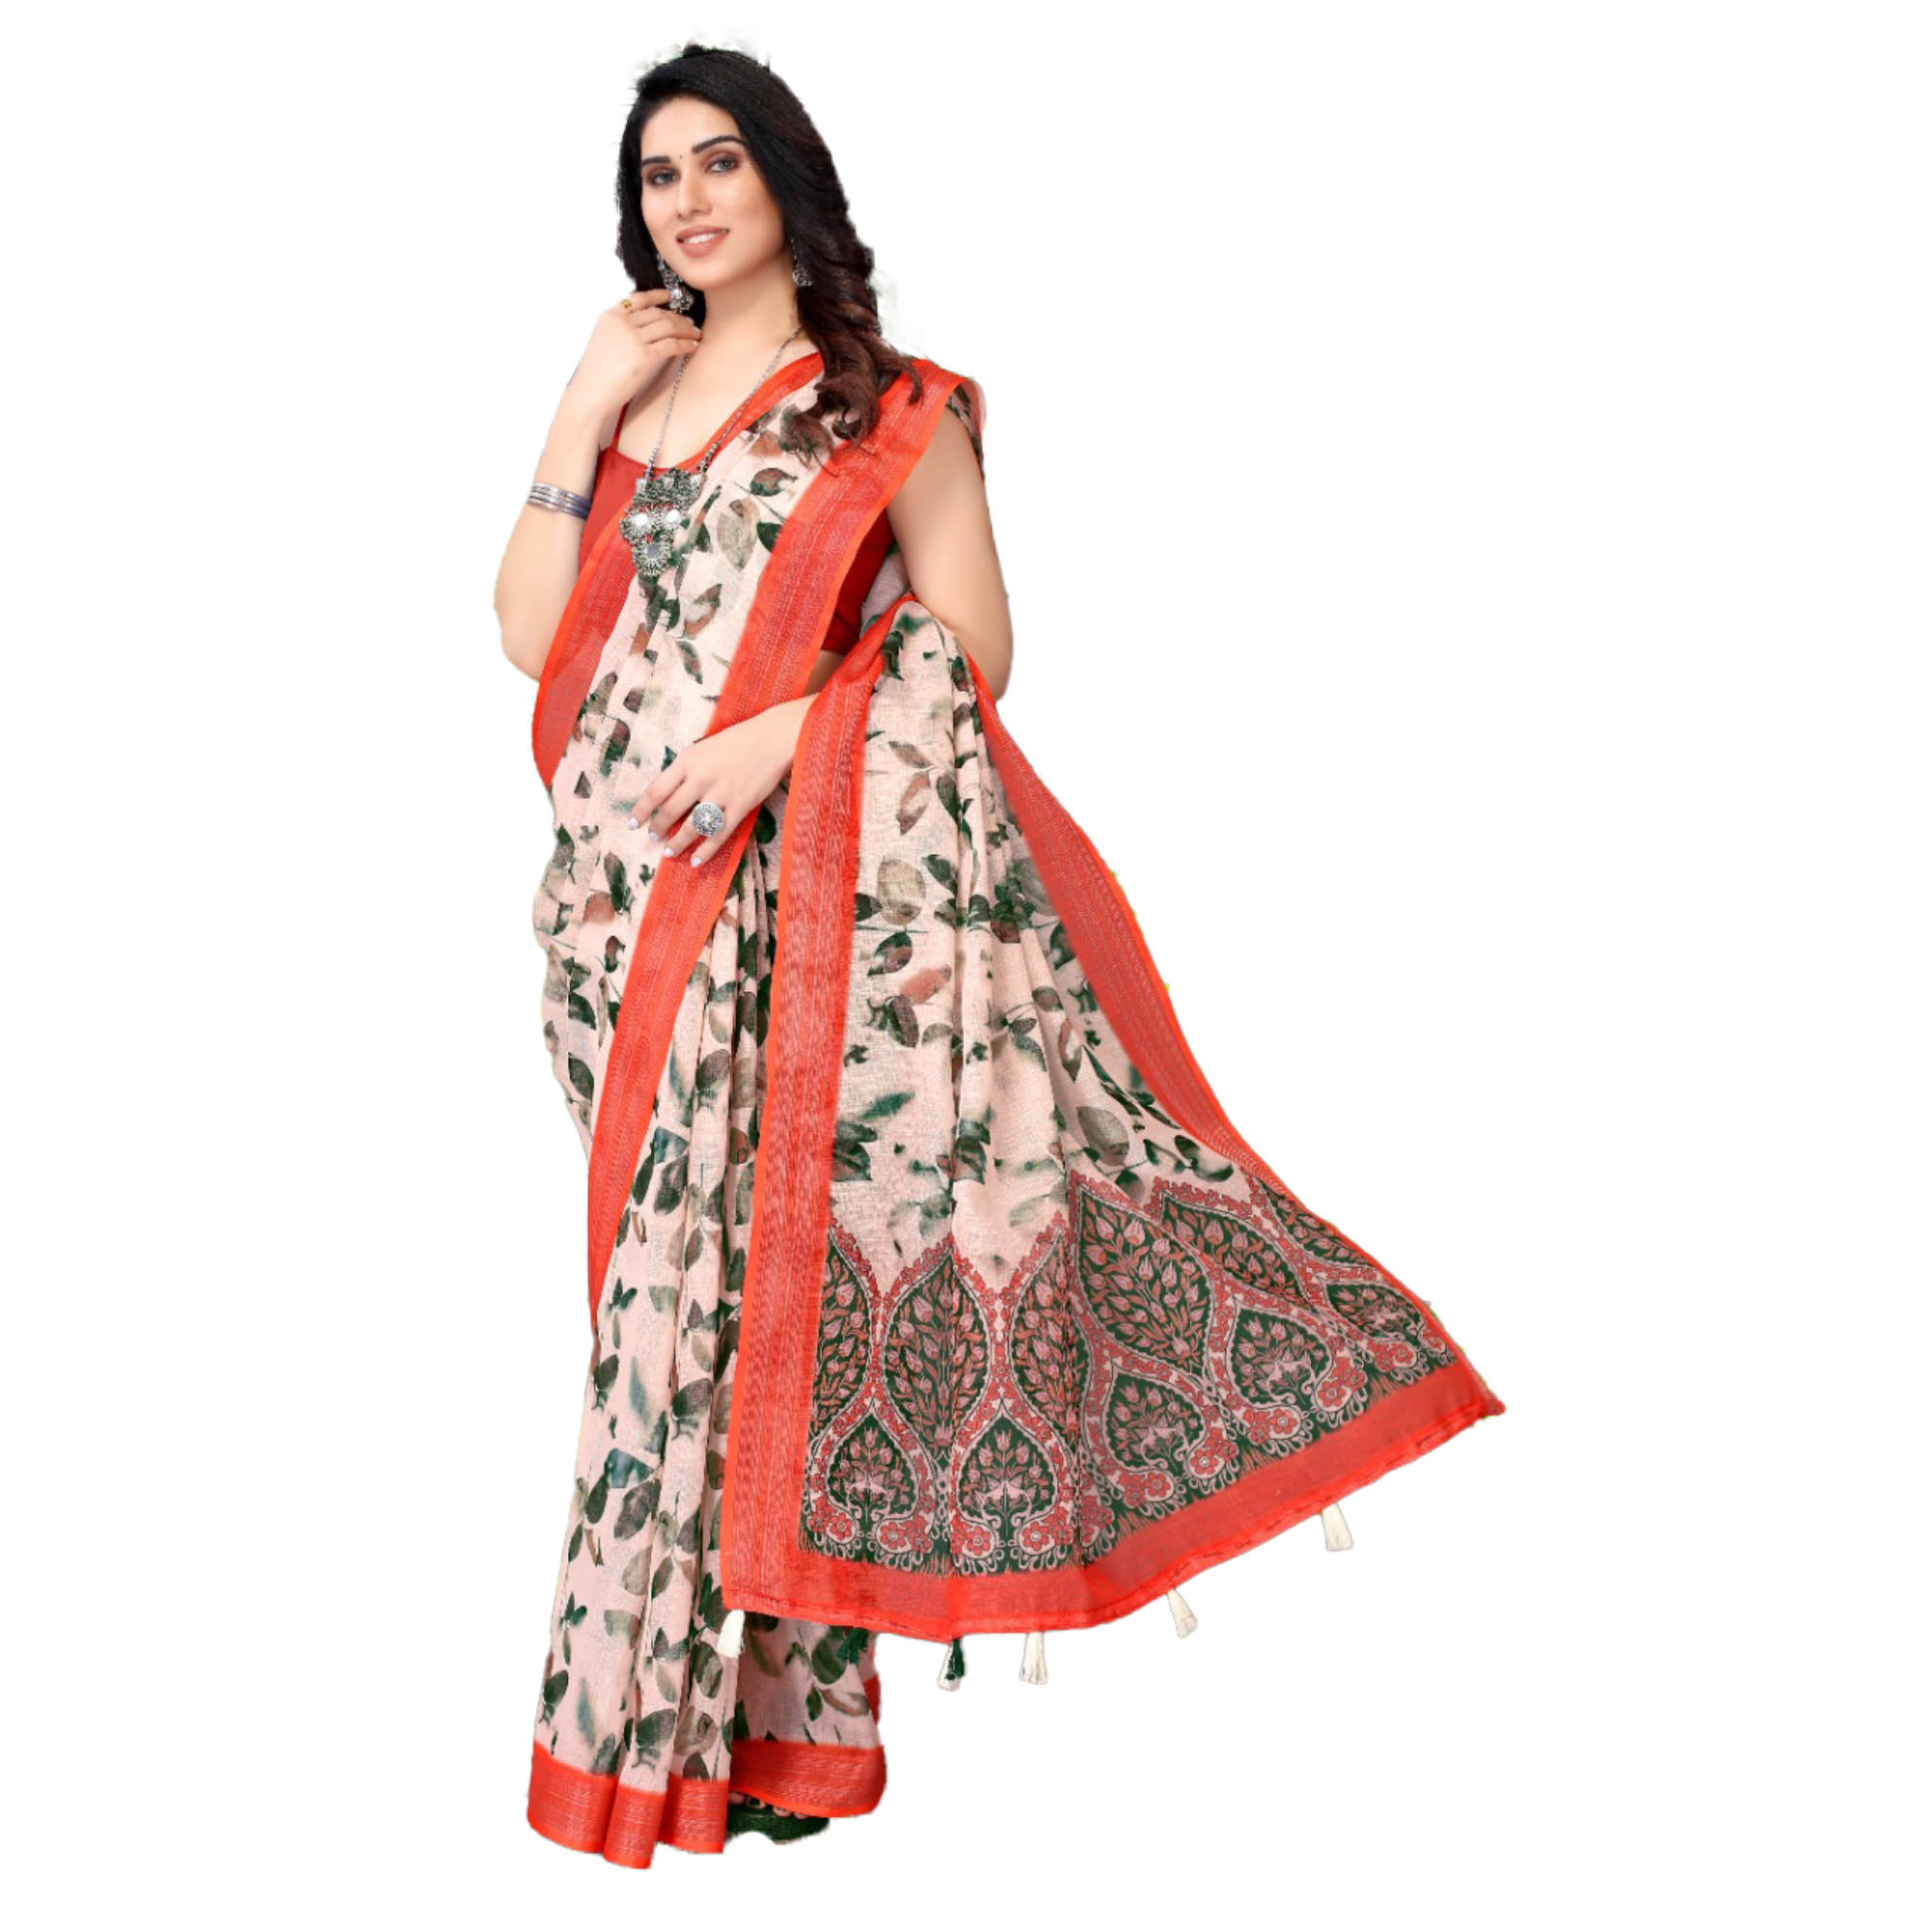 Women's Pink Saree with printed leaf pattern, red border with beautiful betel leaf print. - TheHangr